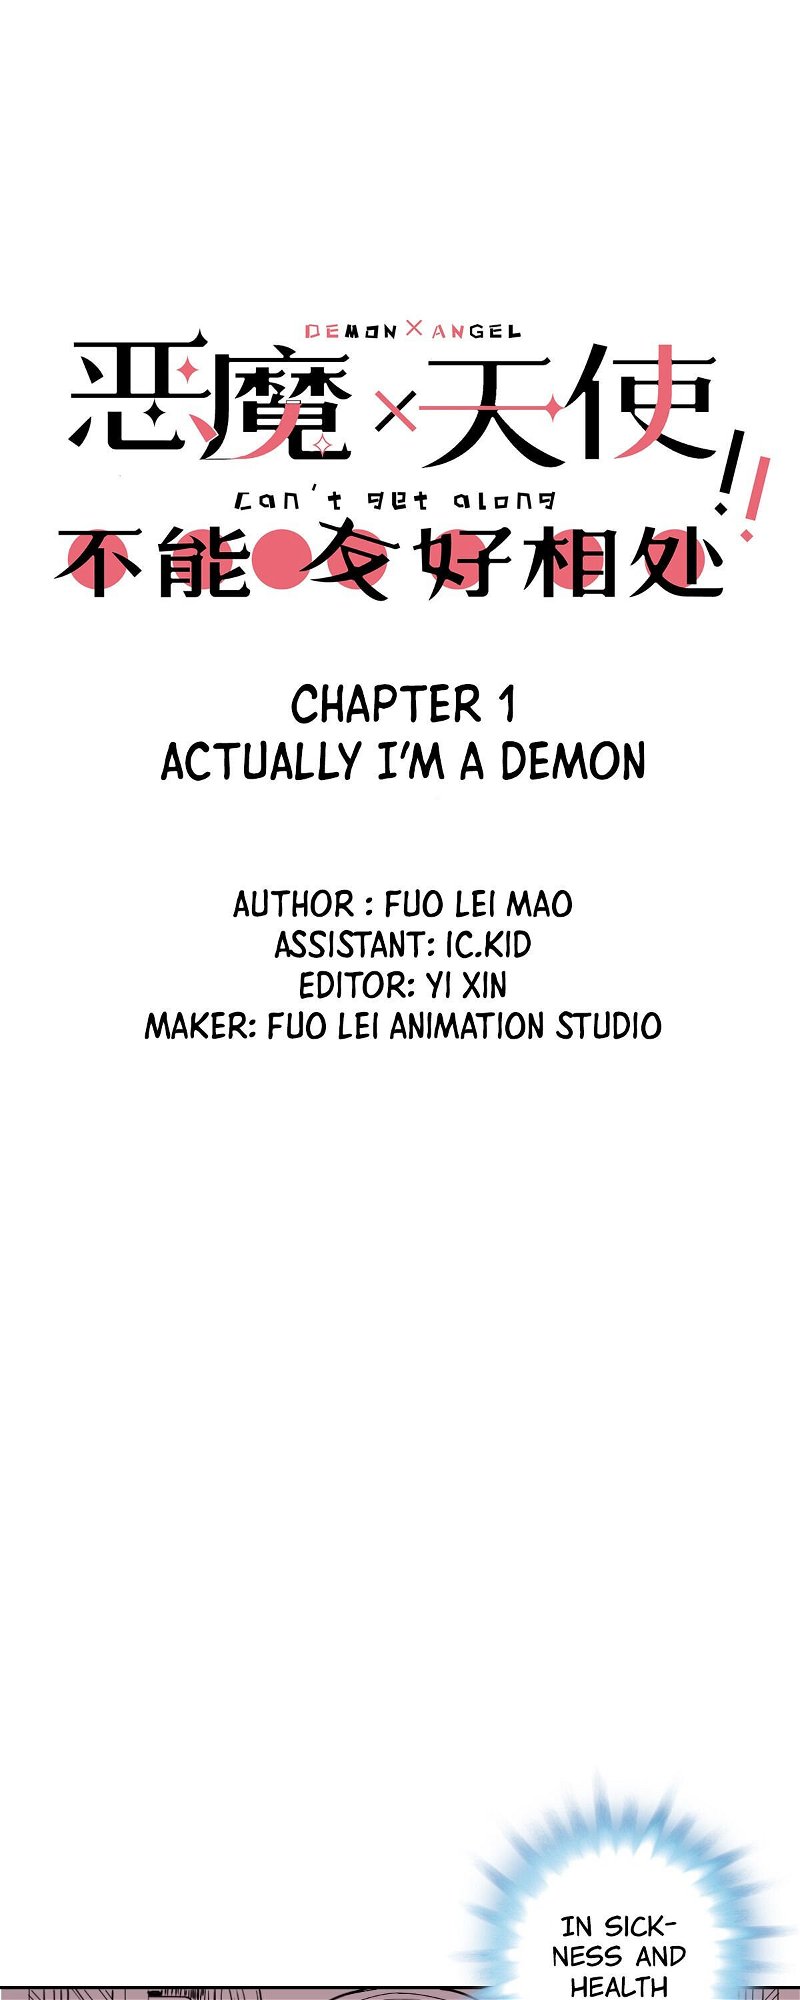 Demon X Angel, Can’t Get Along! Chapter 1 - Page 0